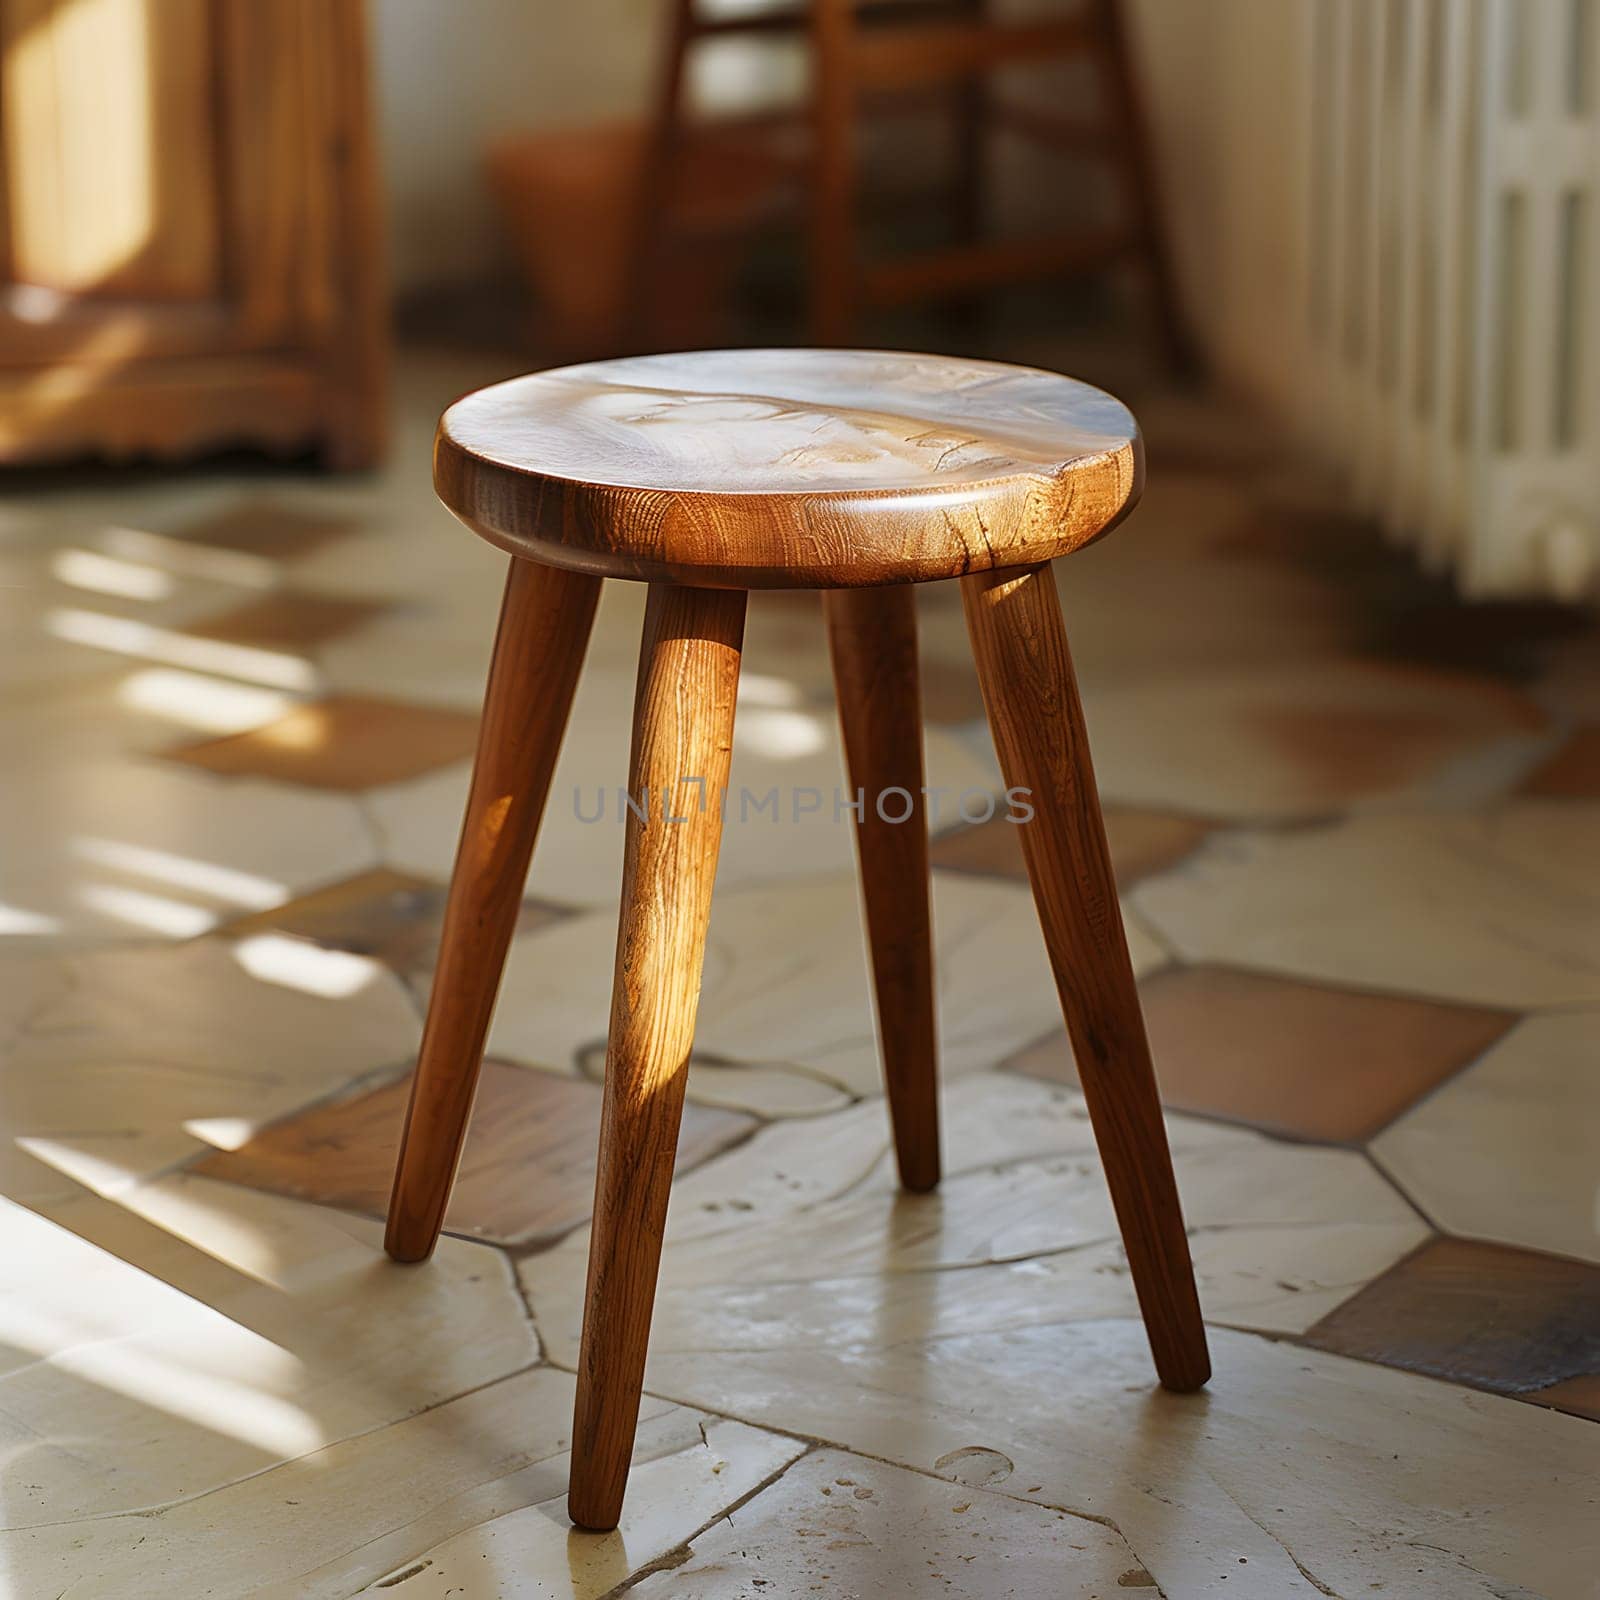 A bar stool made of wood is placed on a hardwood floor with tiles. The stool is finished with wood stain and varnish, adding a rustic touch to the room